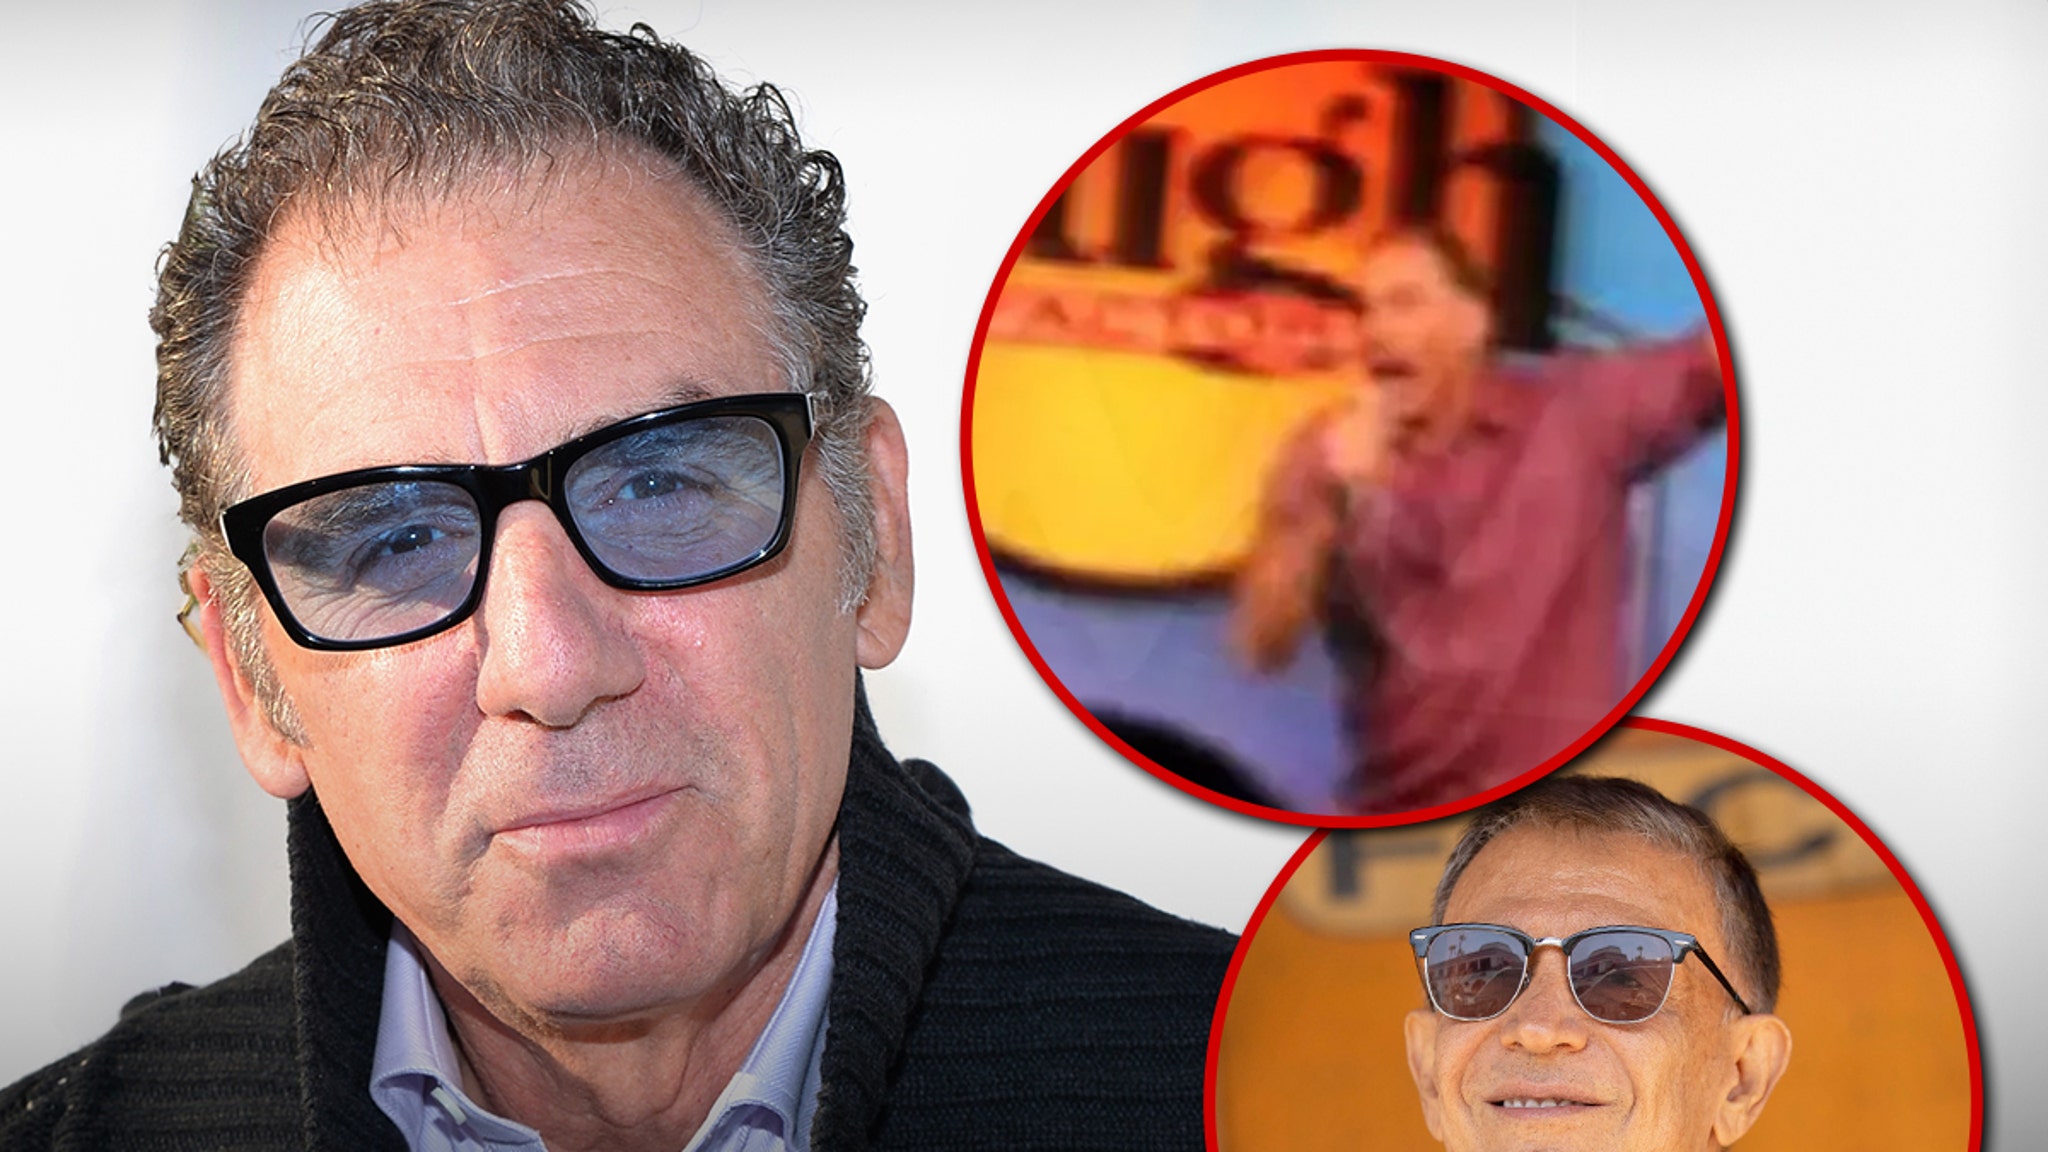 Laugh Factory Owner Says He'd Consider Lifting Michael Richards Ban